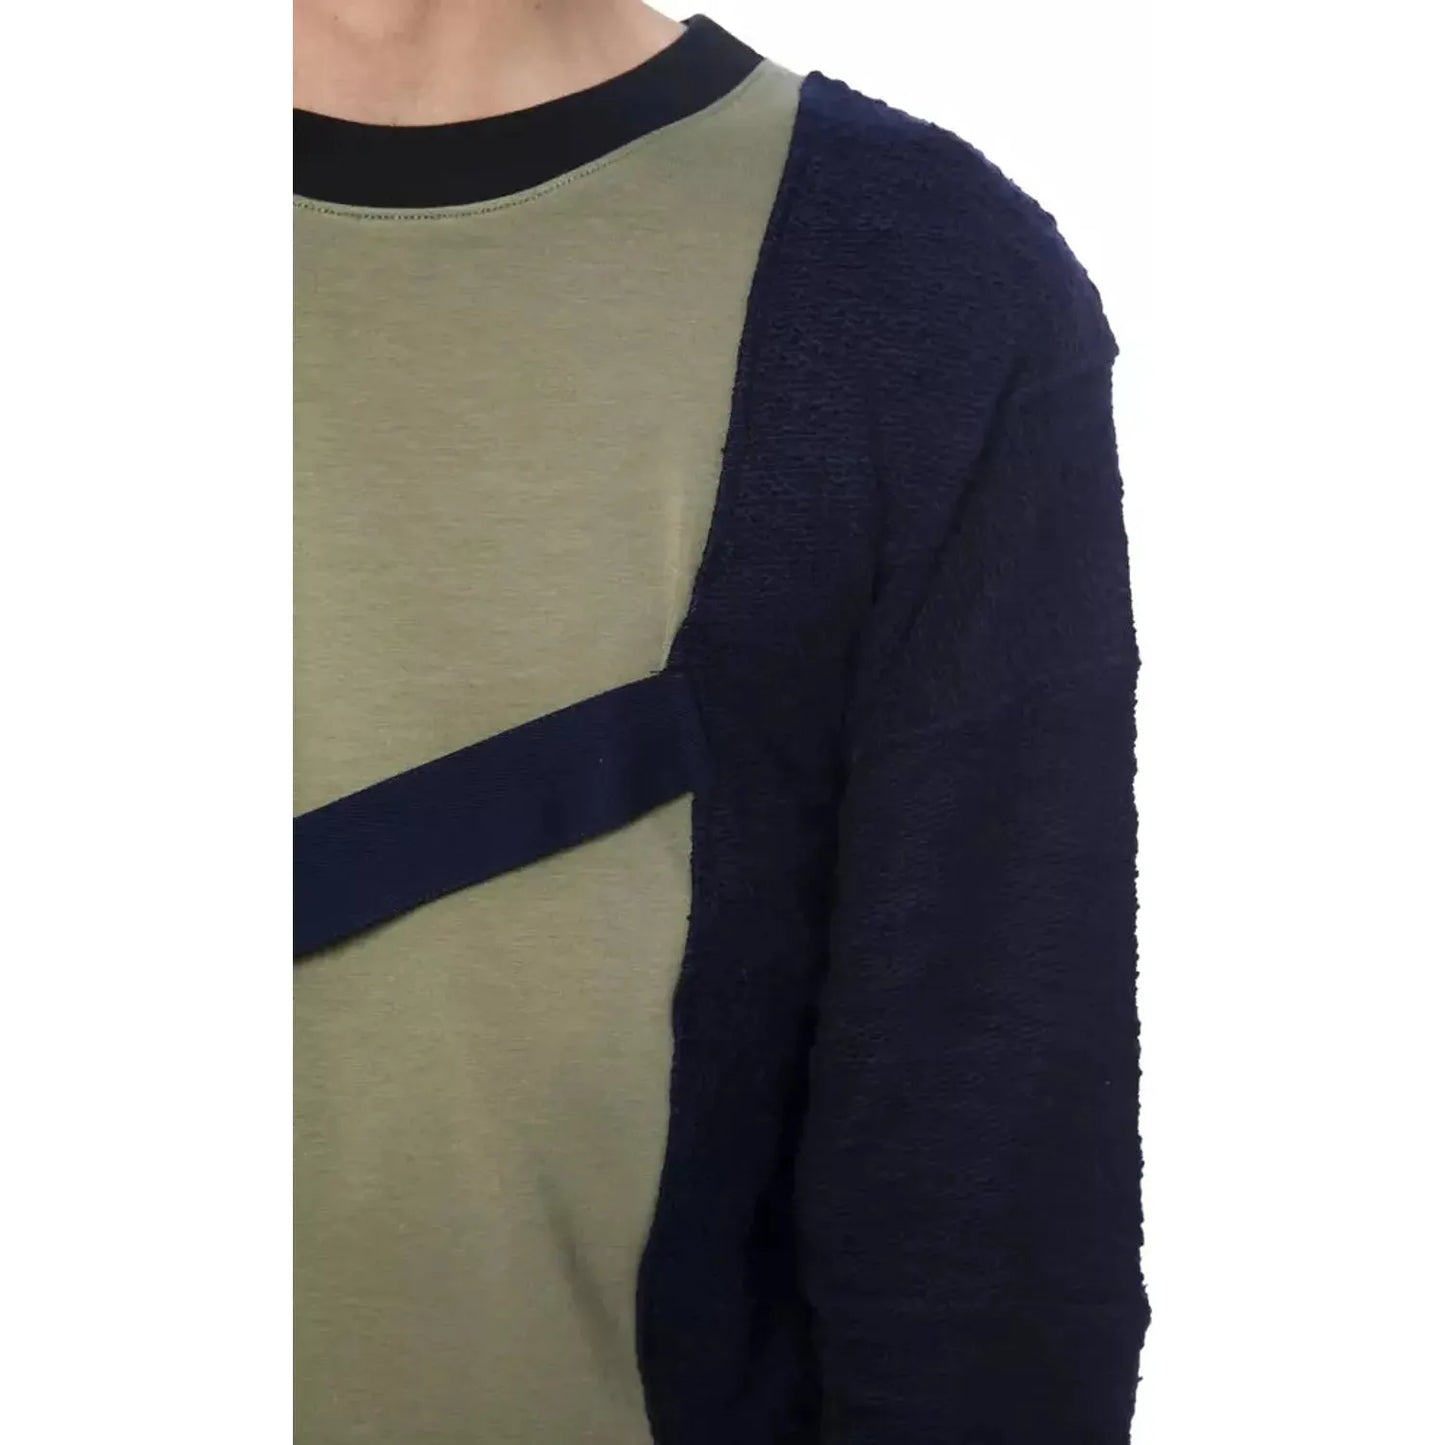 Nicolo Tonetto Elevate Your Style with a Refined Army Fleece army-blue-sweater